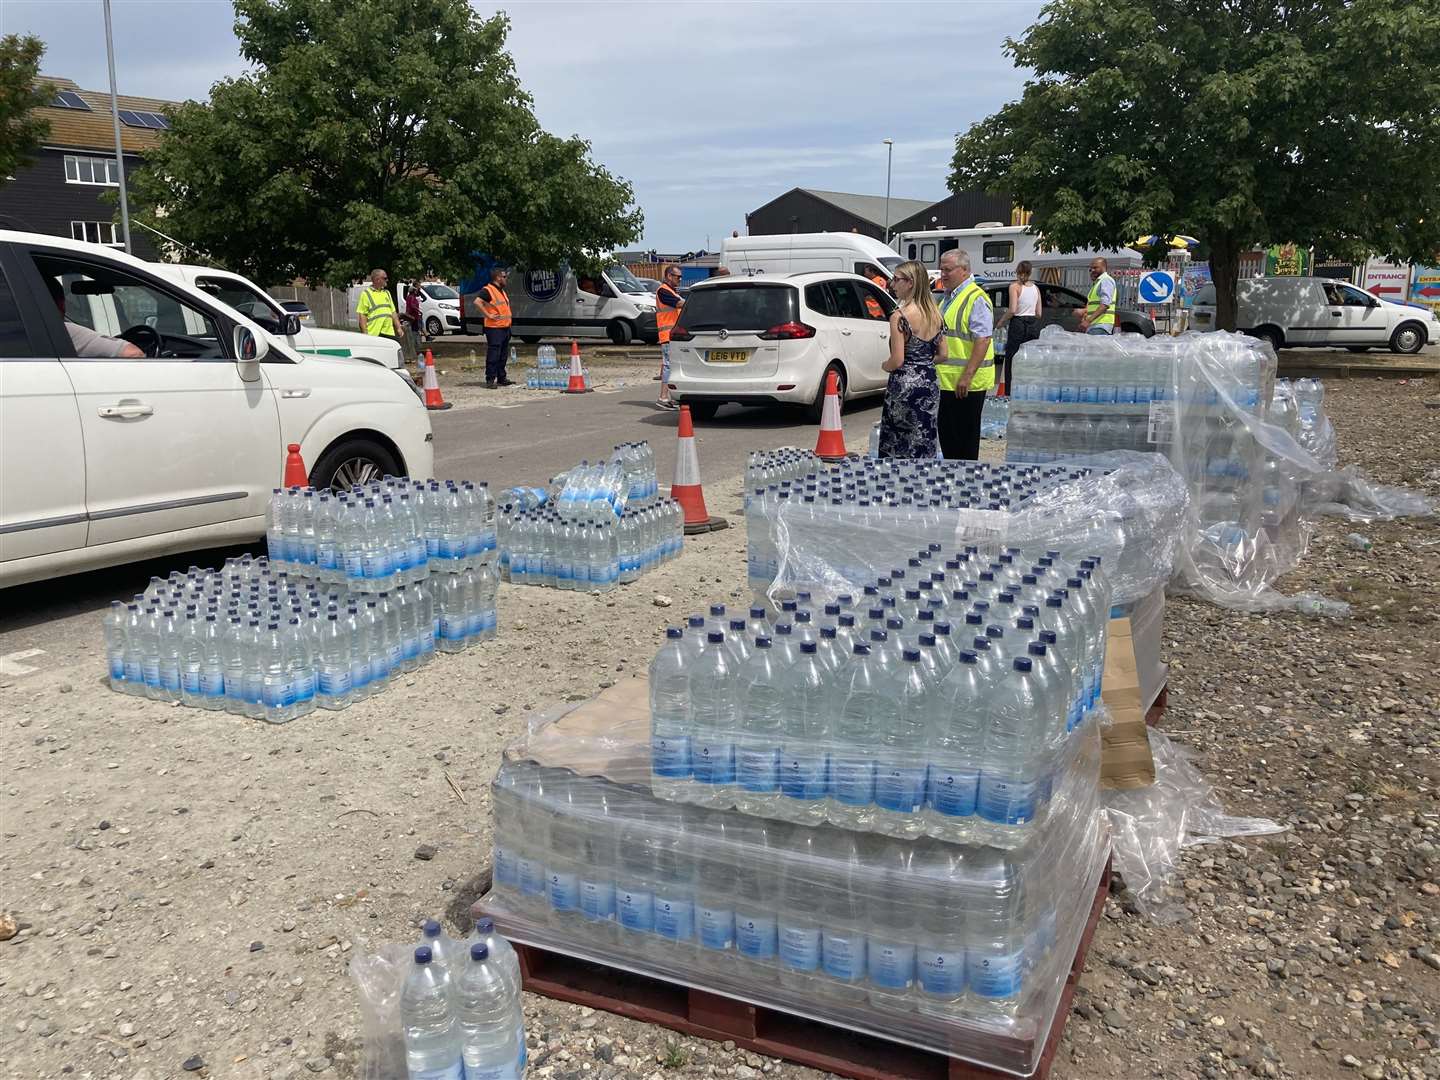 Hundreds of people are arriving at the Leysdown emergency water collection point as Southern Water provide 350,000 litres of bottled supplies to customers following a burst main on the Kingsferry Bridge